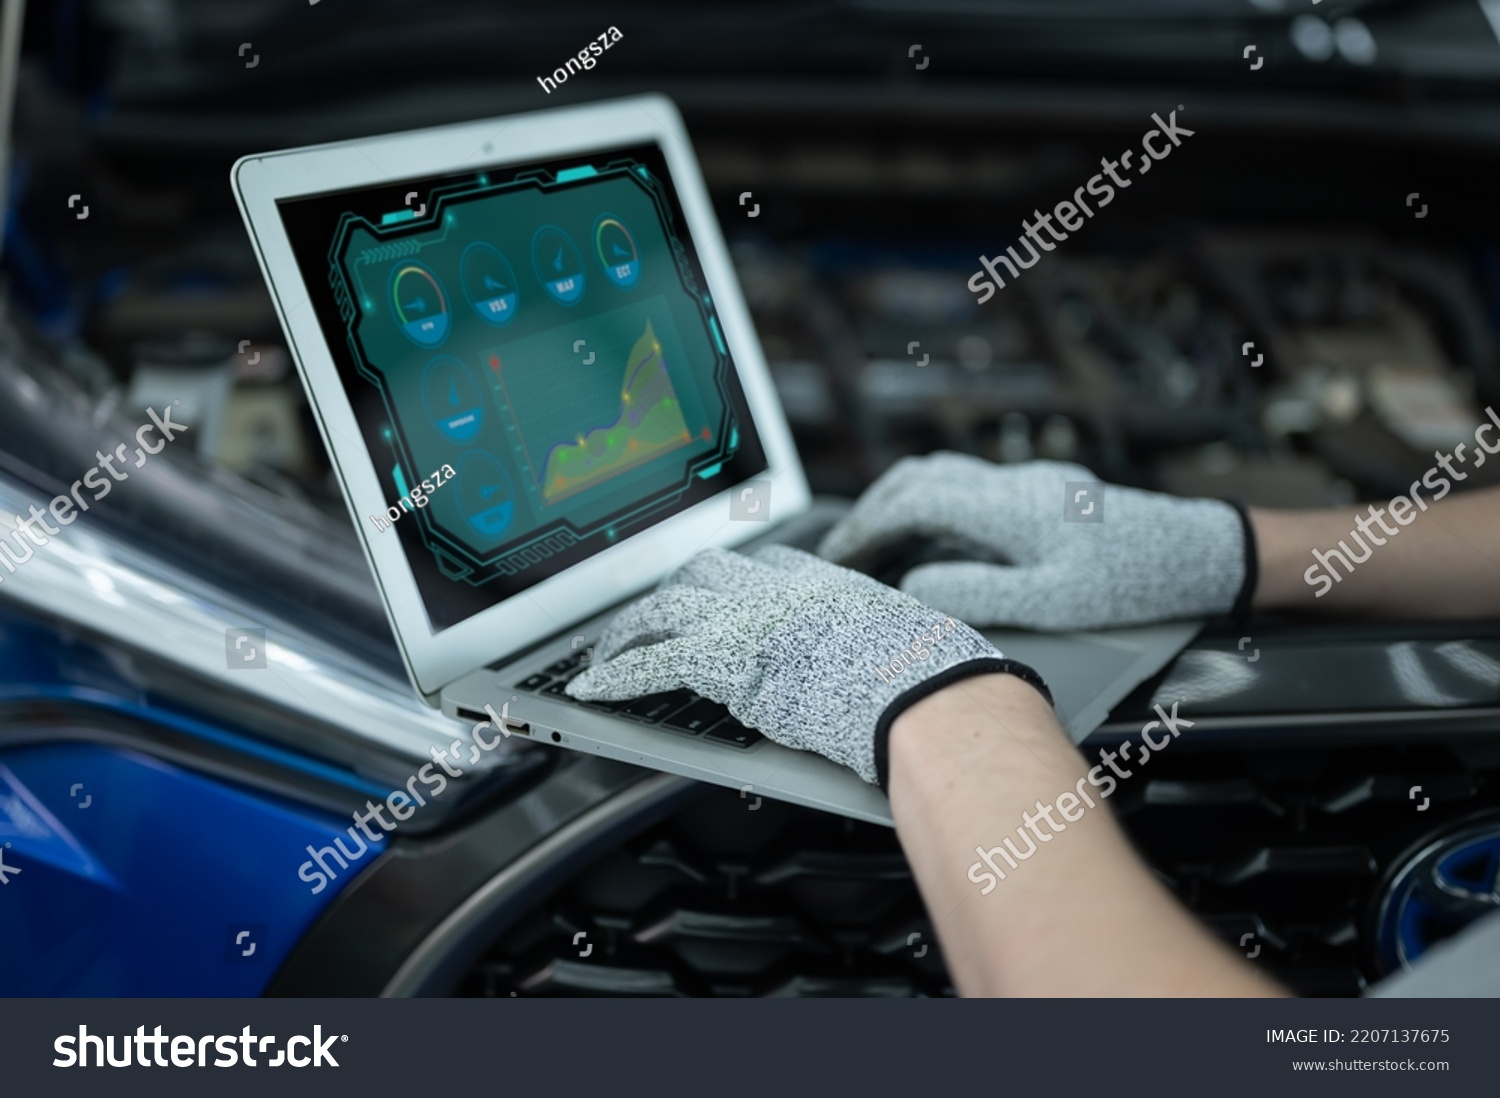 Mechanic Asian Arab man close up using laptop computer and diagnostic software to tuning fixing repairing car engine automobile vehicle parts using tools equipment in workshop garage support services #2207137675